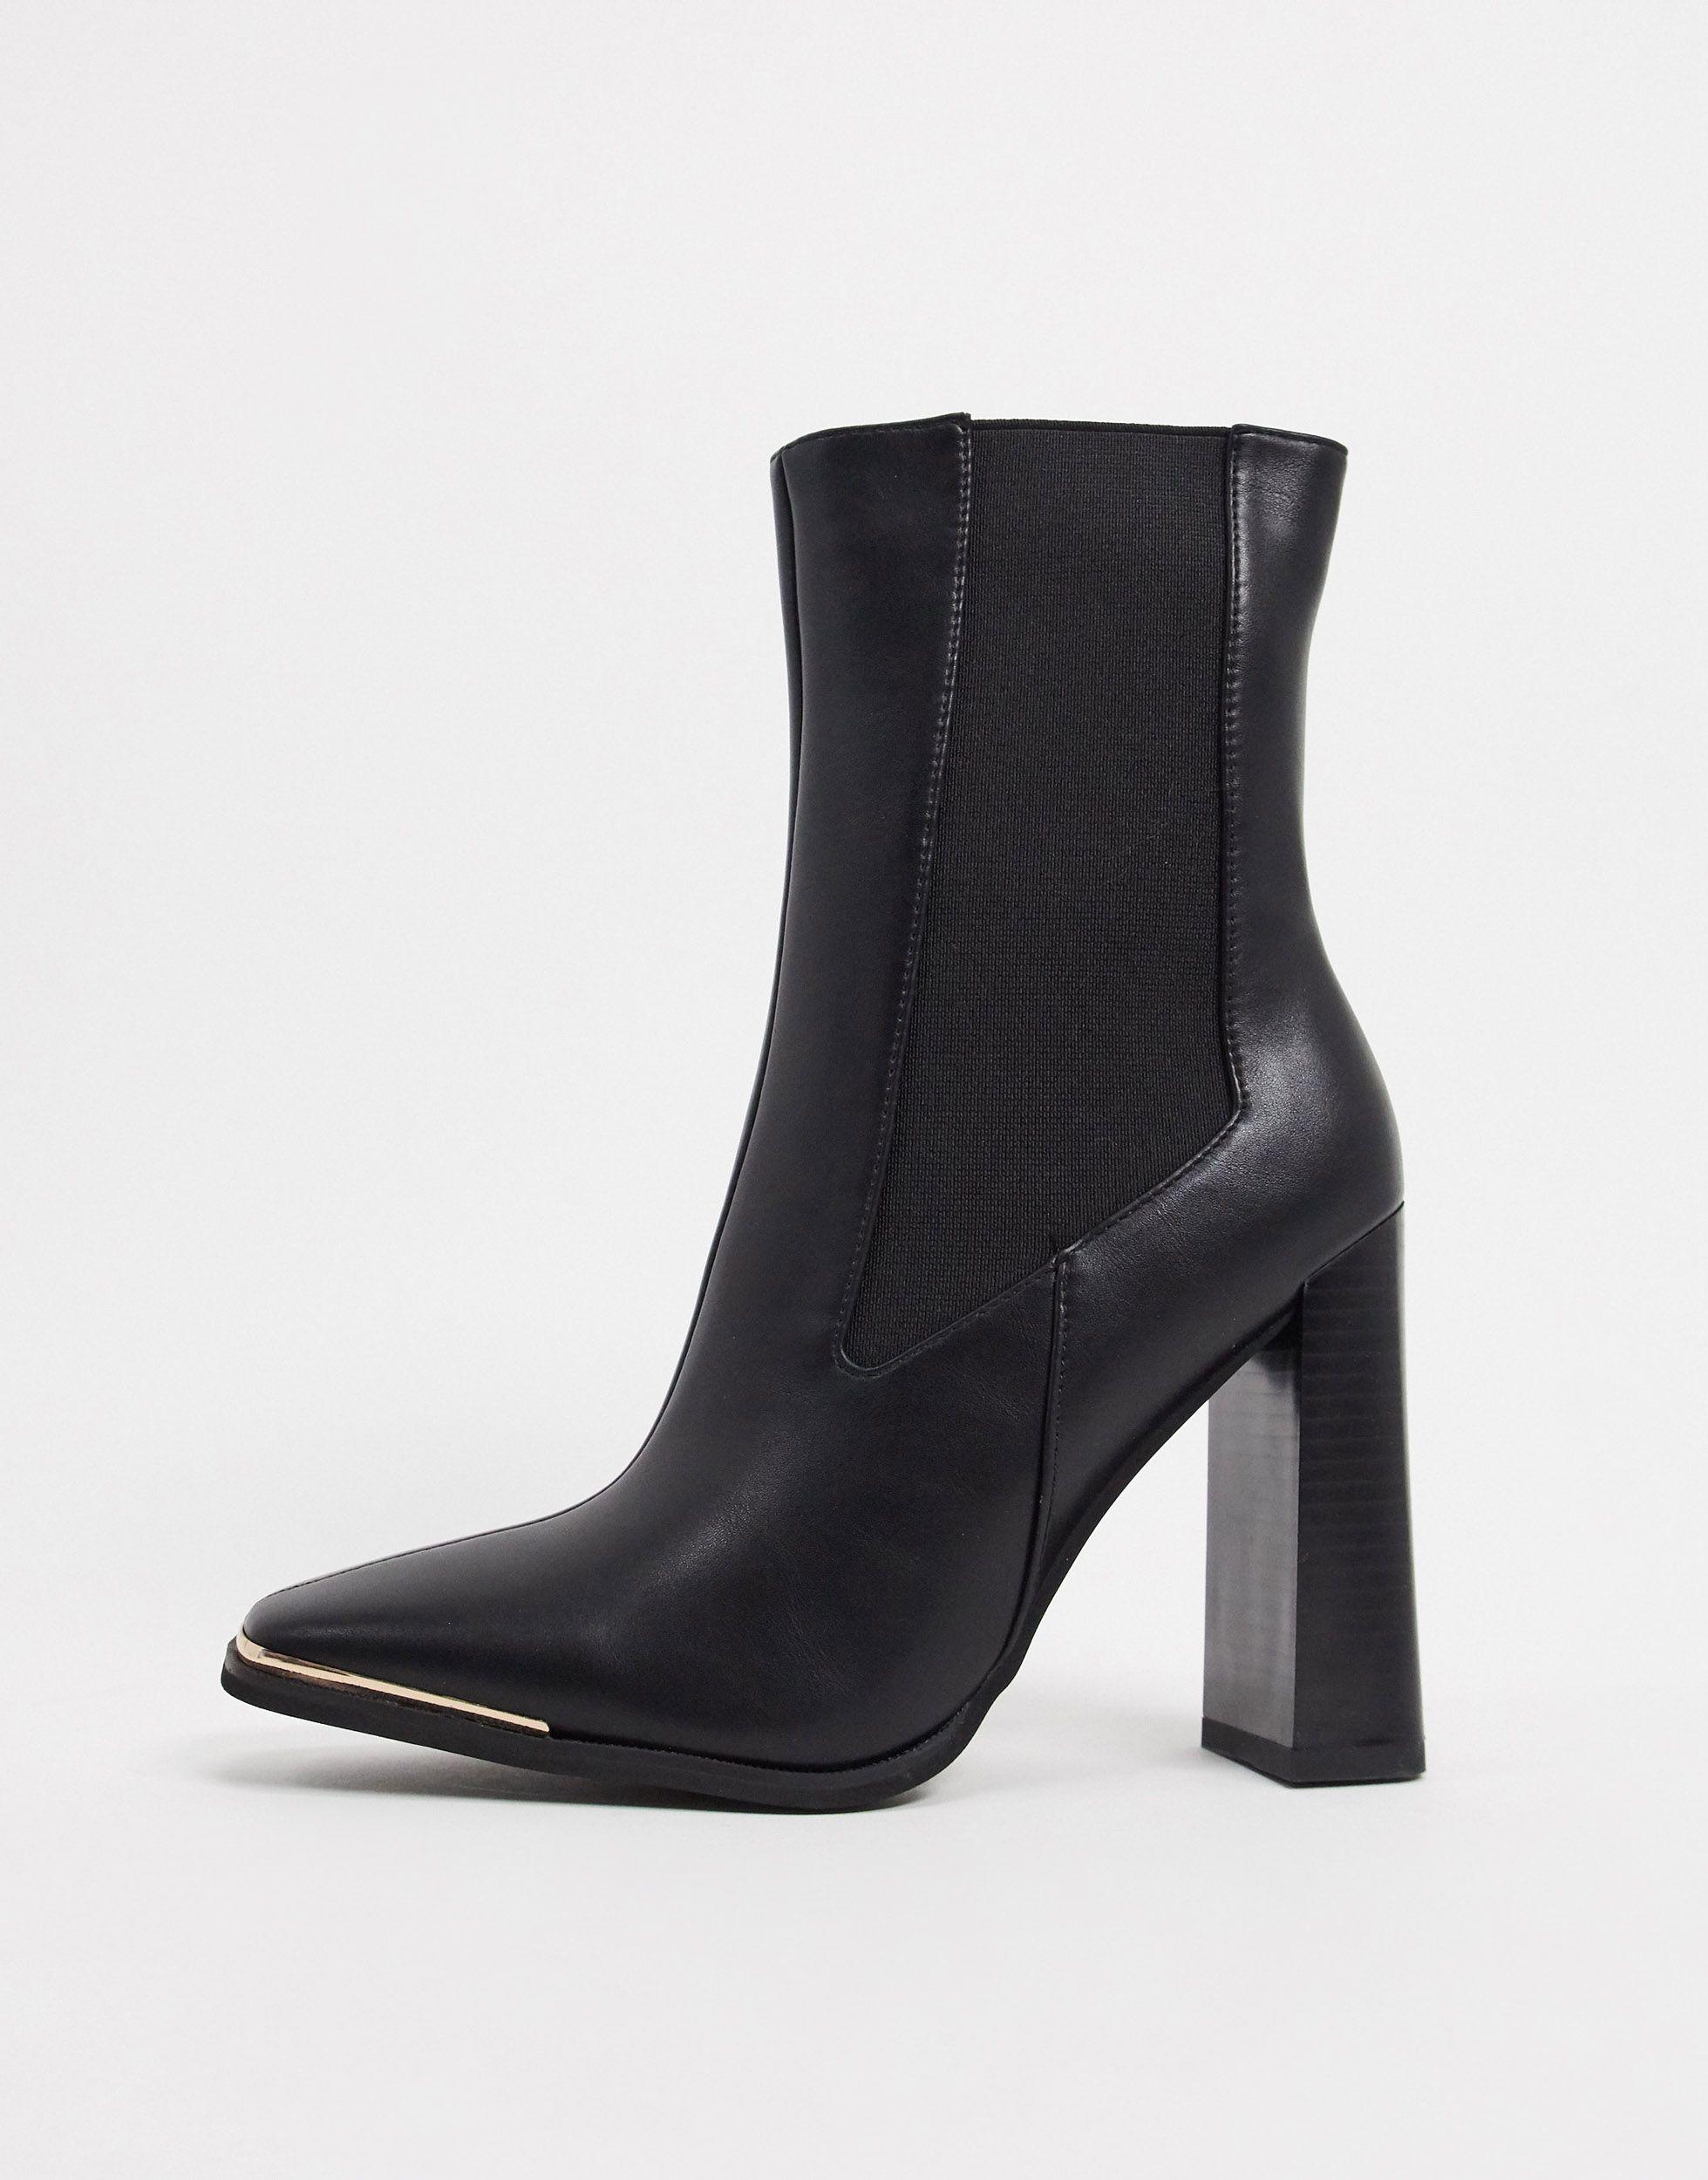 SIMMI Shoes Simmi London Melisa Square Toe Chelsea Boot With Gold ...